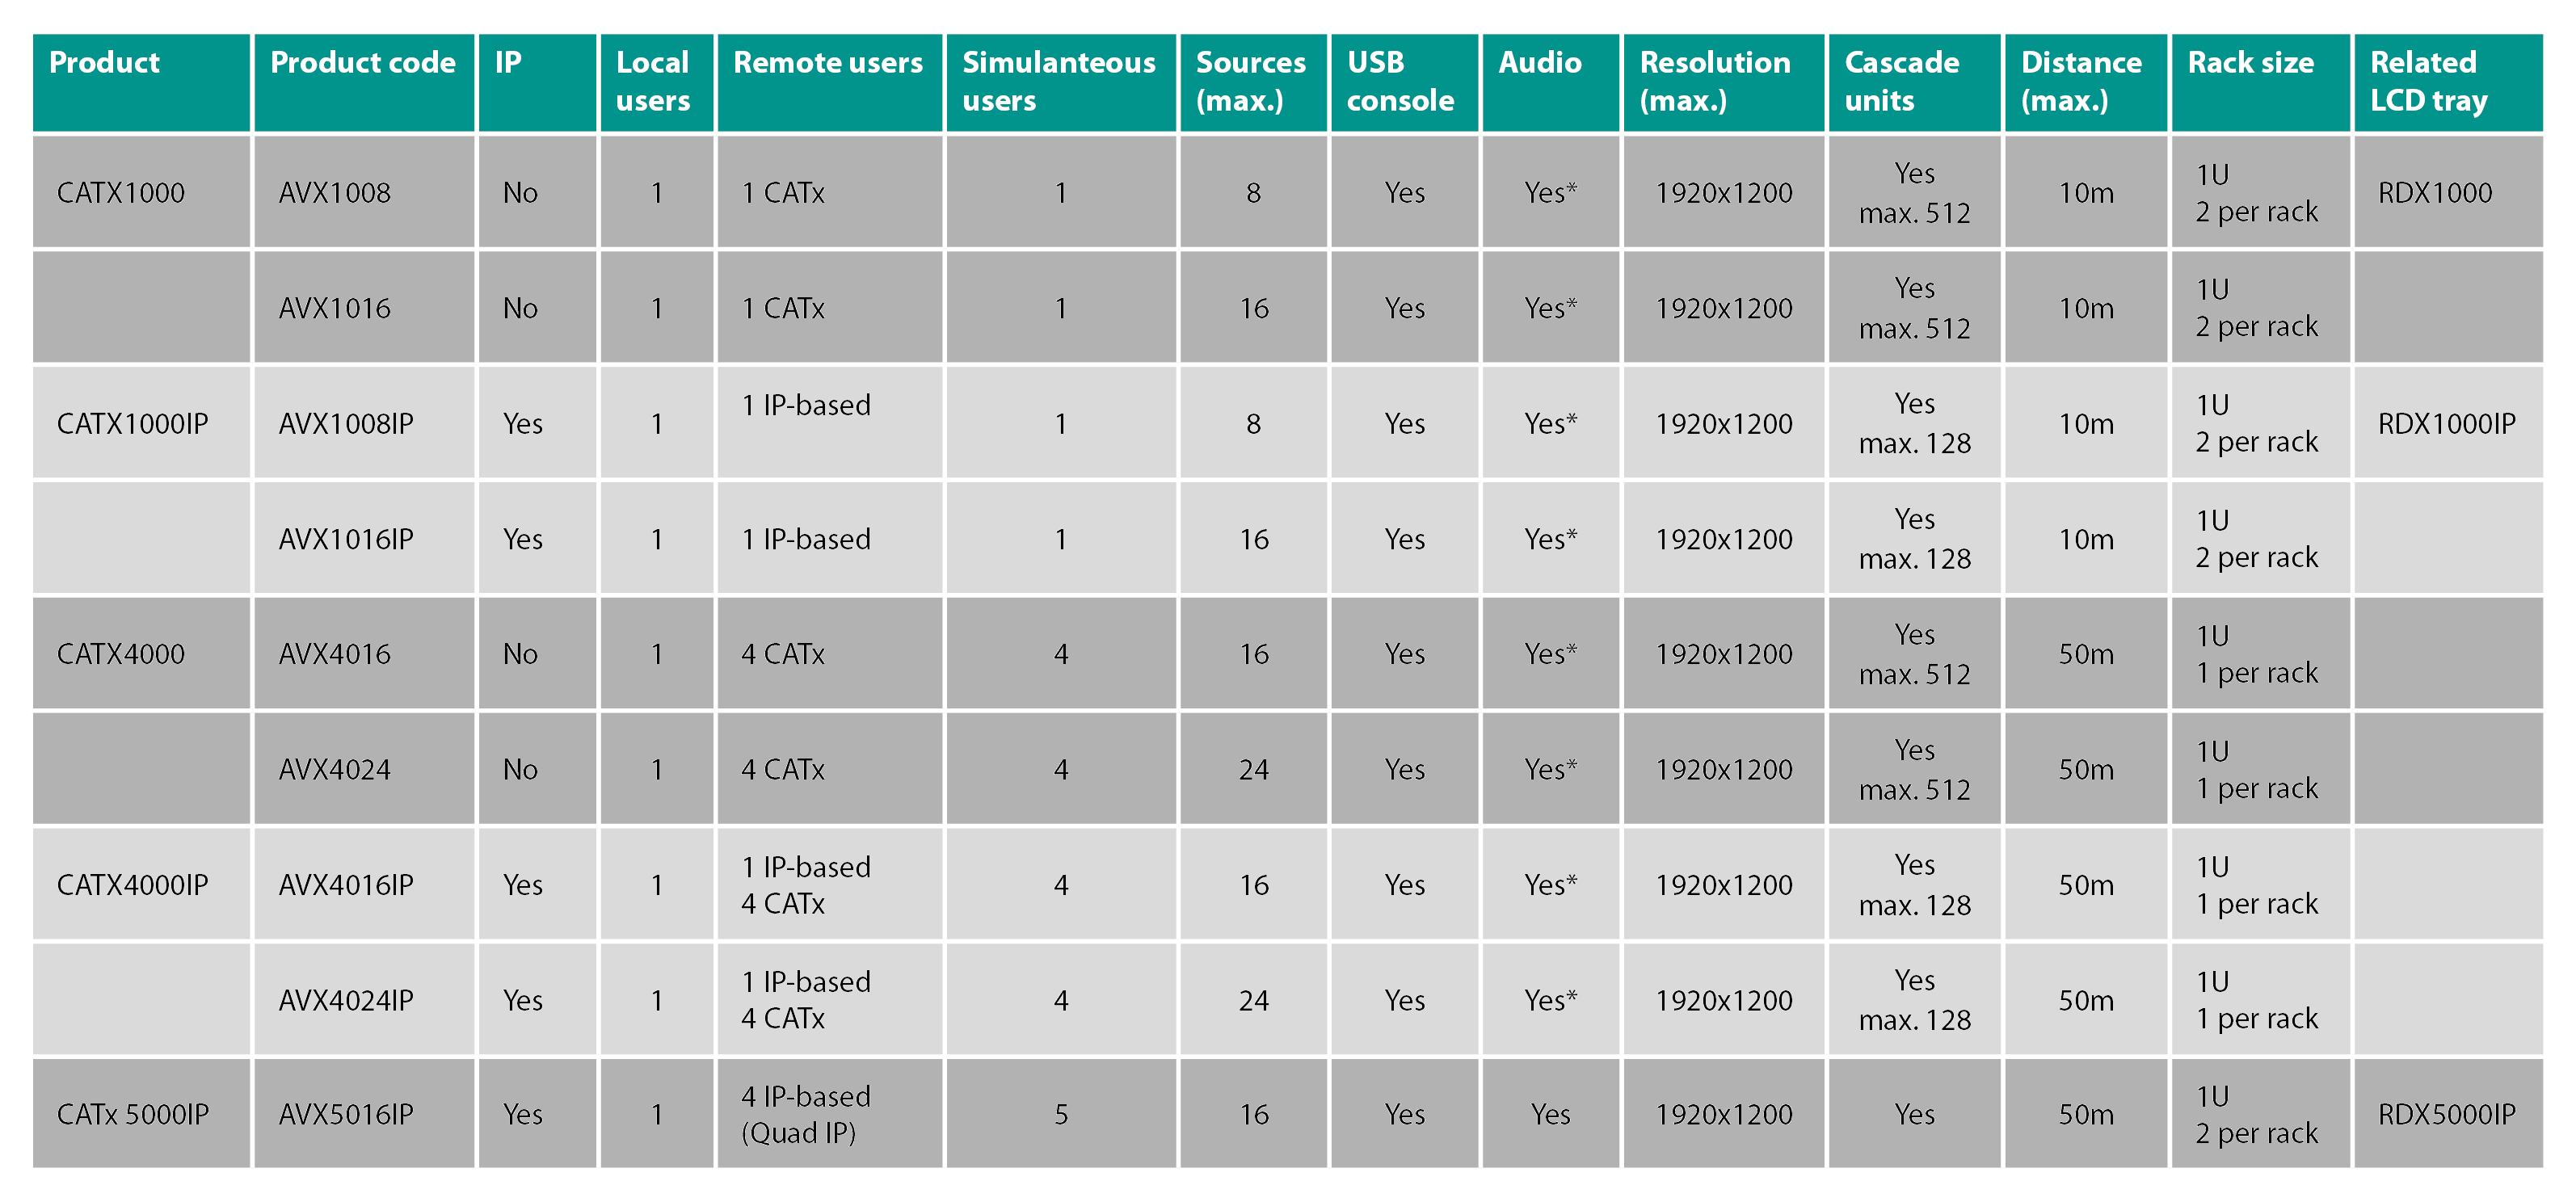 Comparison of CATx products